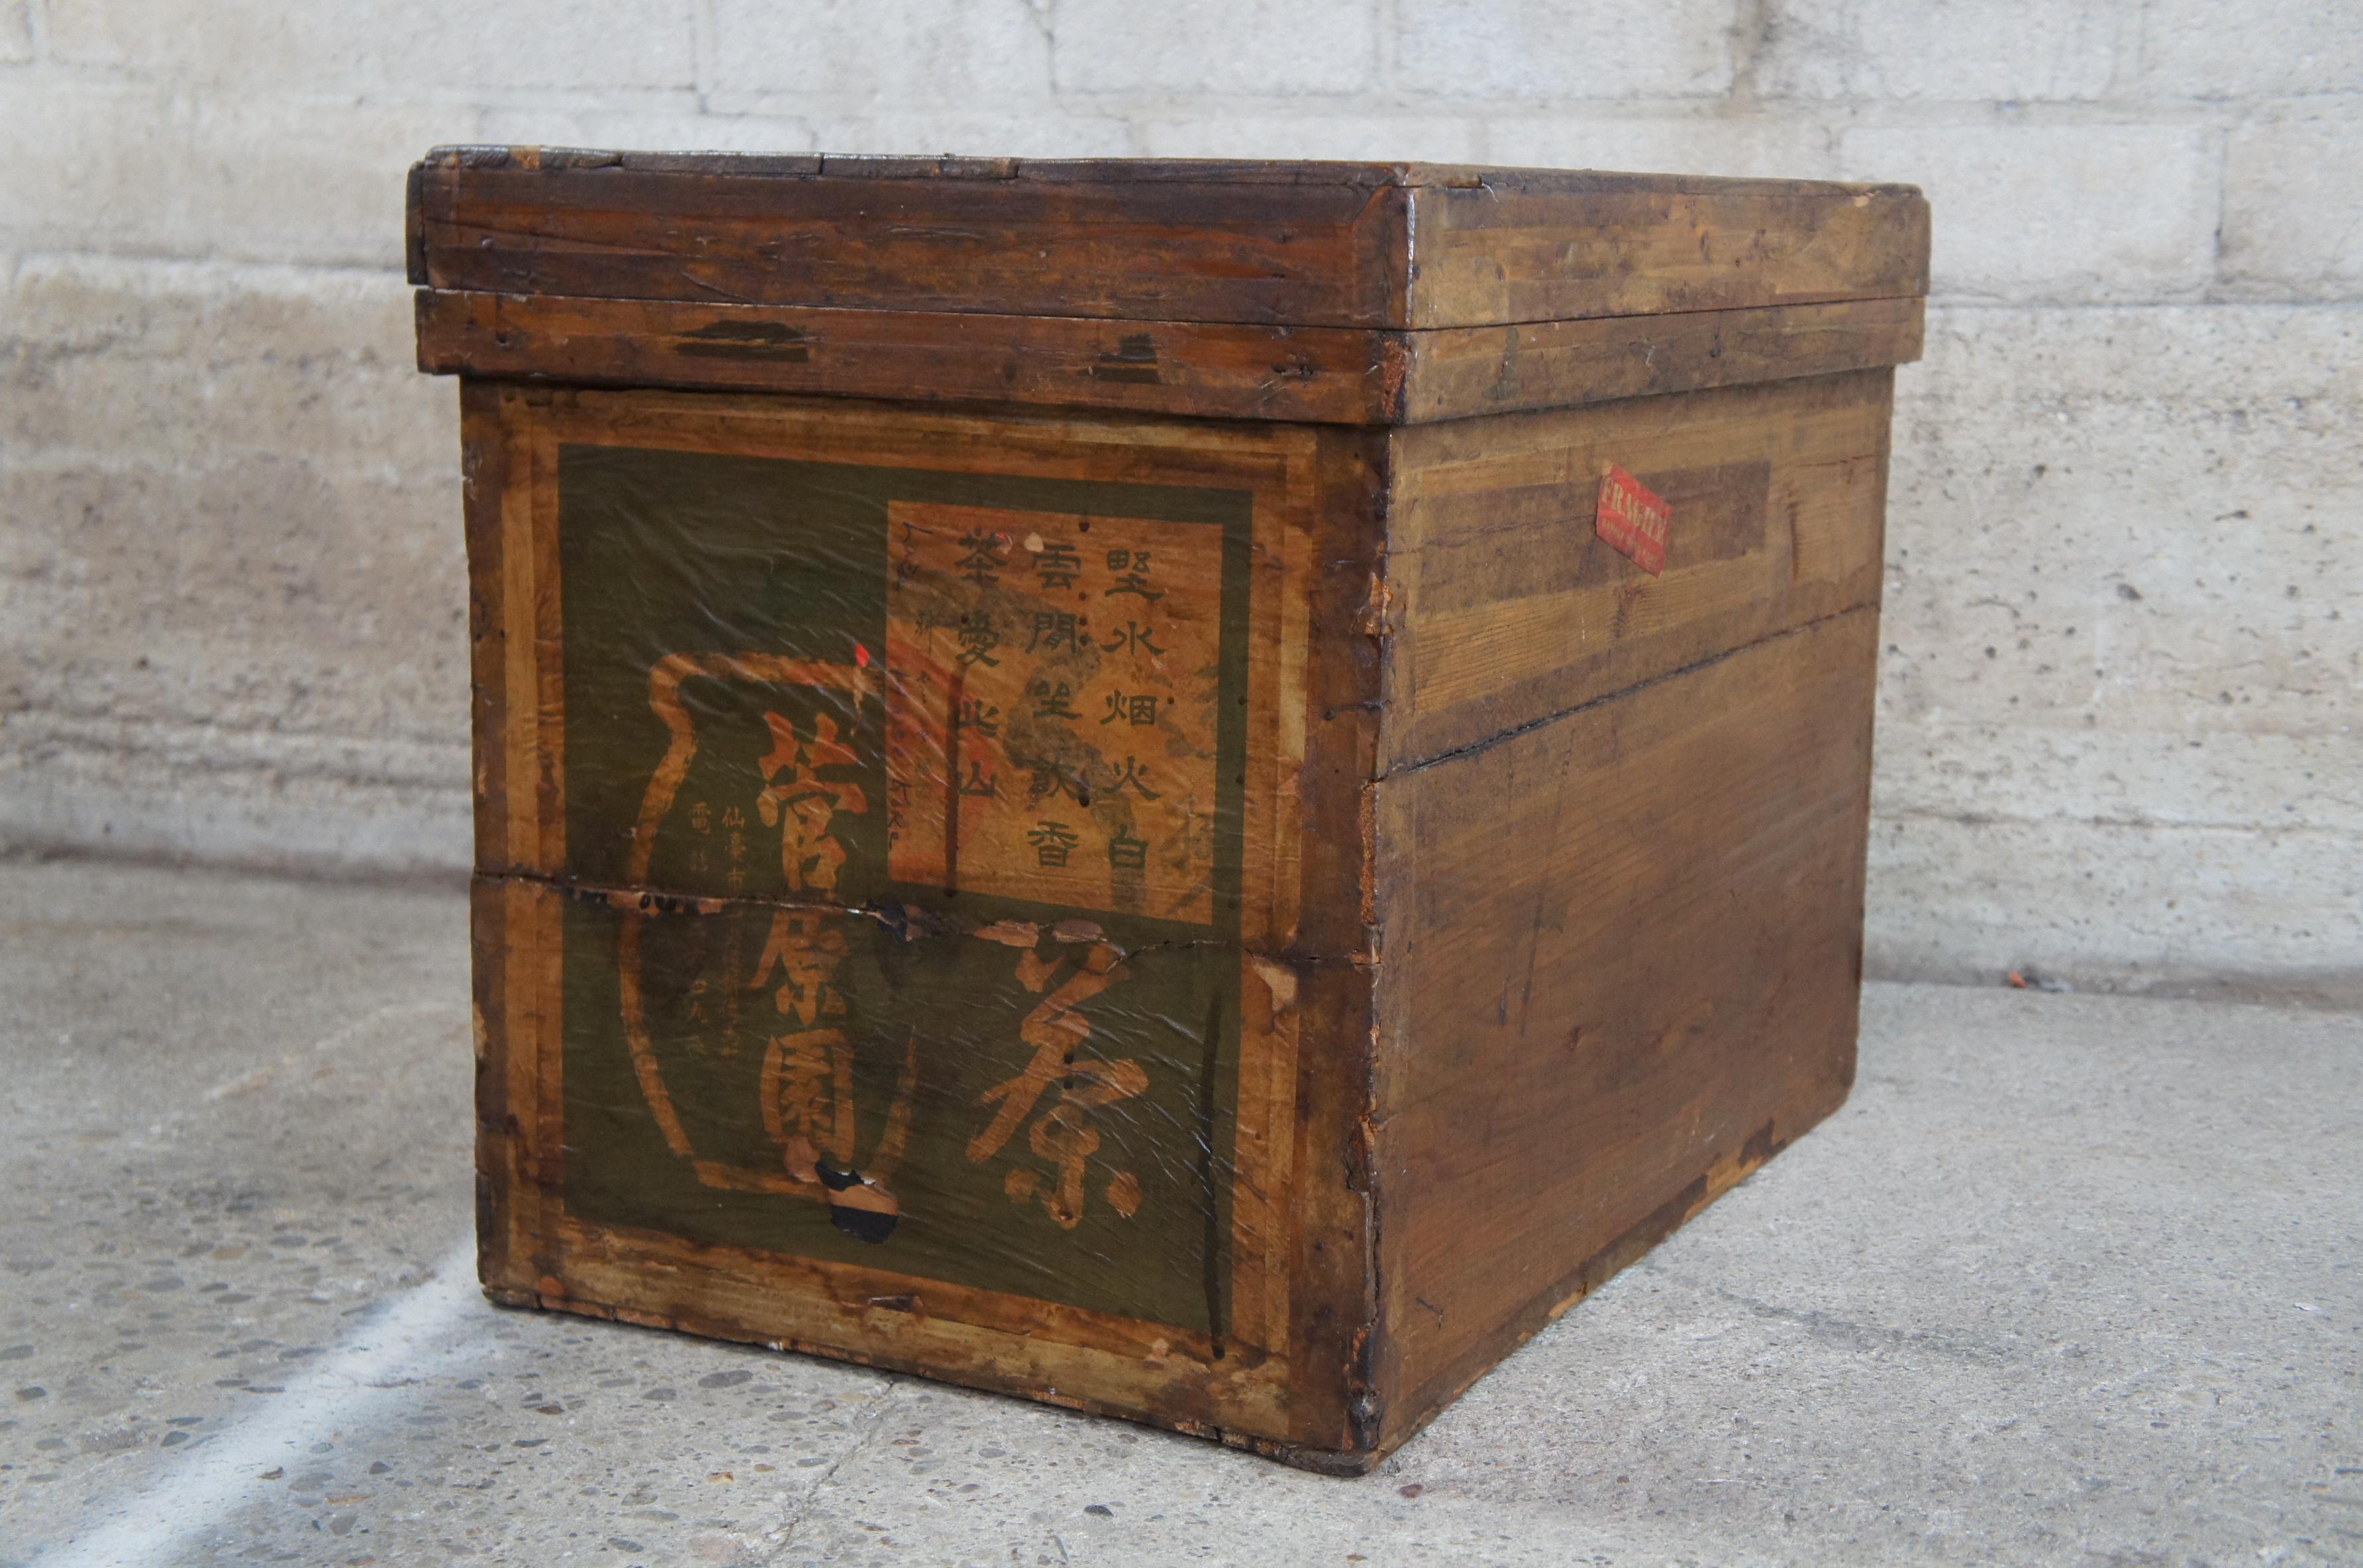 20th Century Antique Chinese Wooden Tea Shipping Box Crate Tin Lining Coffee End Table